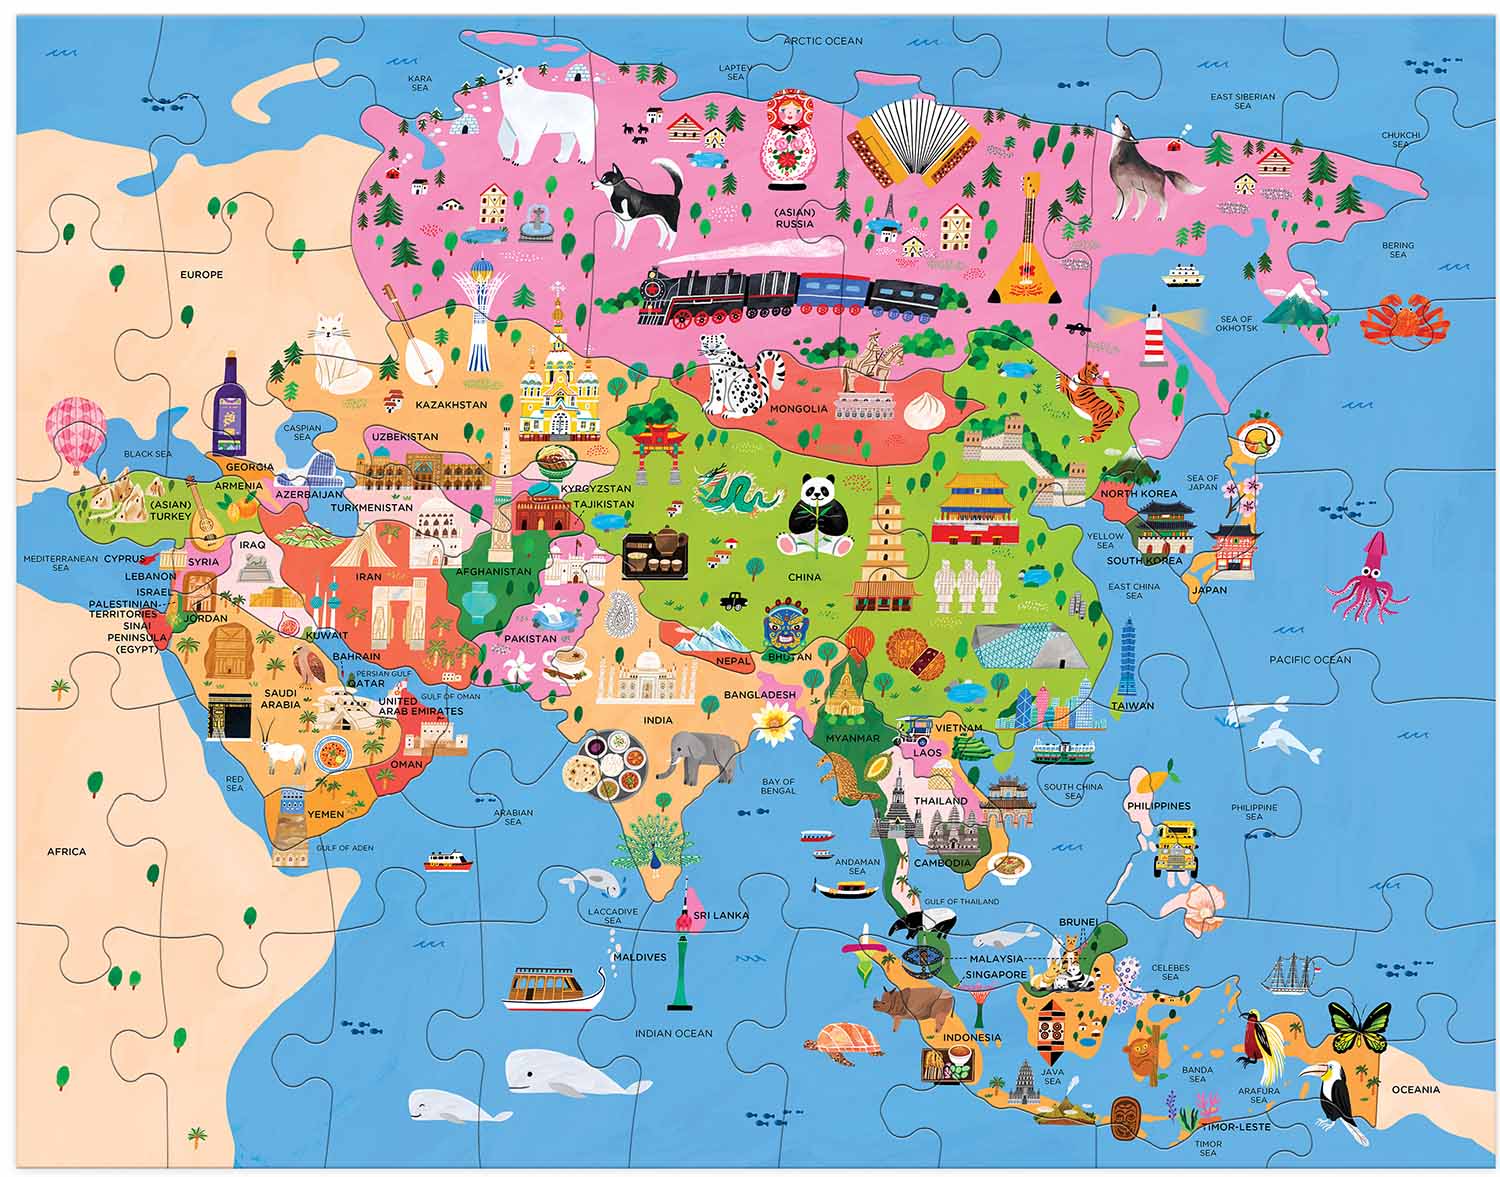 Map of Asia  - Scratch and Dent Educational Jigsaw Puzzle